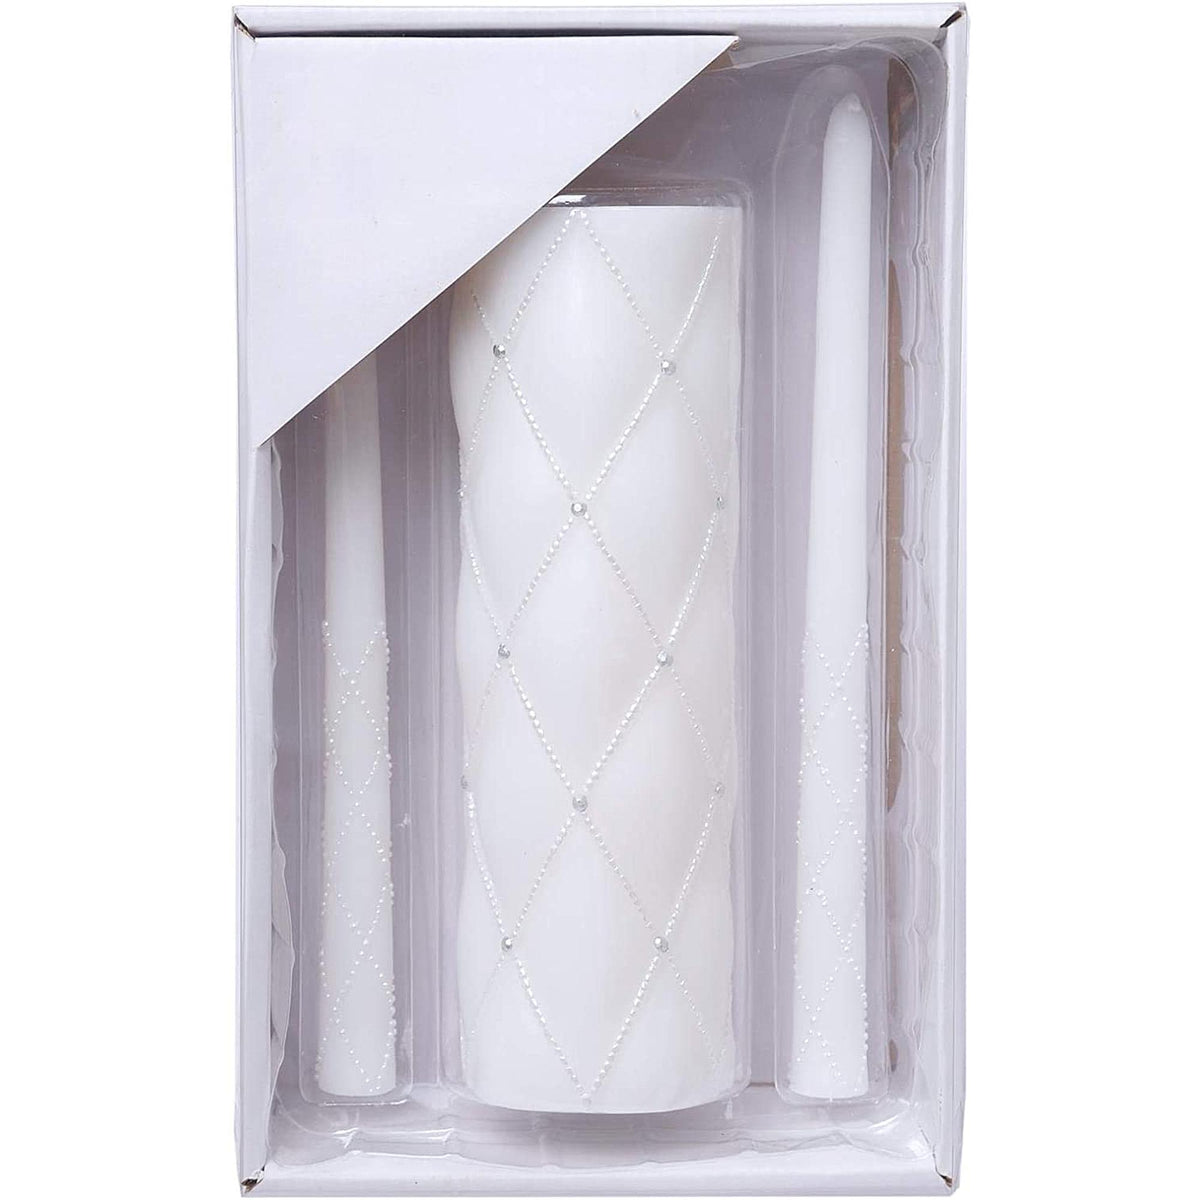 HOSLEY®  Wedding Unity Candle Set, White Color, 11.5 inches  High